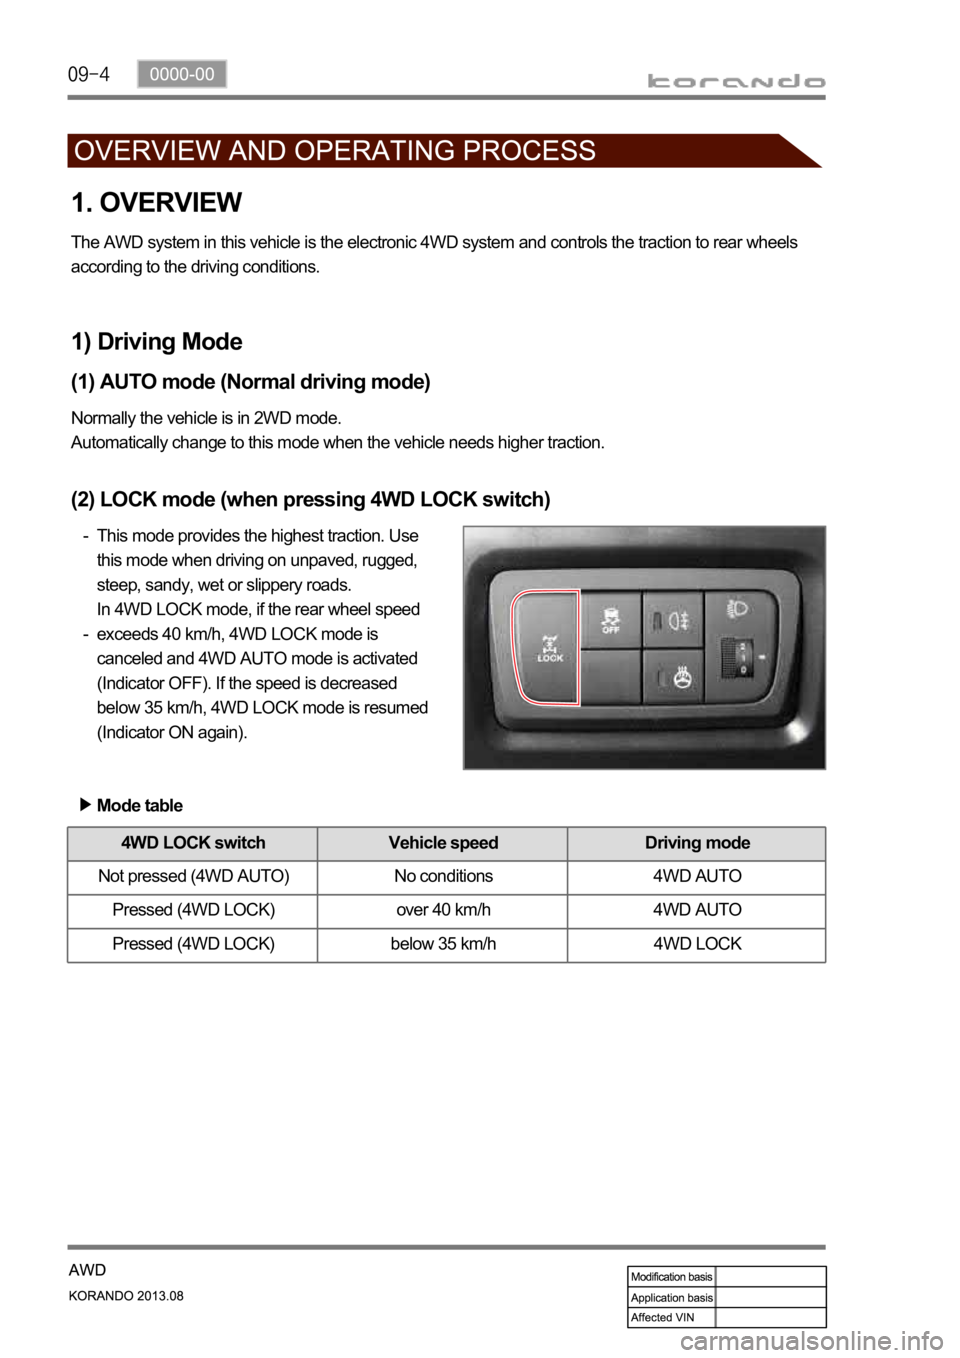 SSANGYONG KORANDO 2013  Service Manual 1. OVERVIEW
The AWD system in this vehicle is the electronic 4WD system and controls the traction to rear wheels 
according to the driving conditions.
1) Driving Mode
(1) AUTO mode (Normal driving mod